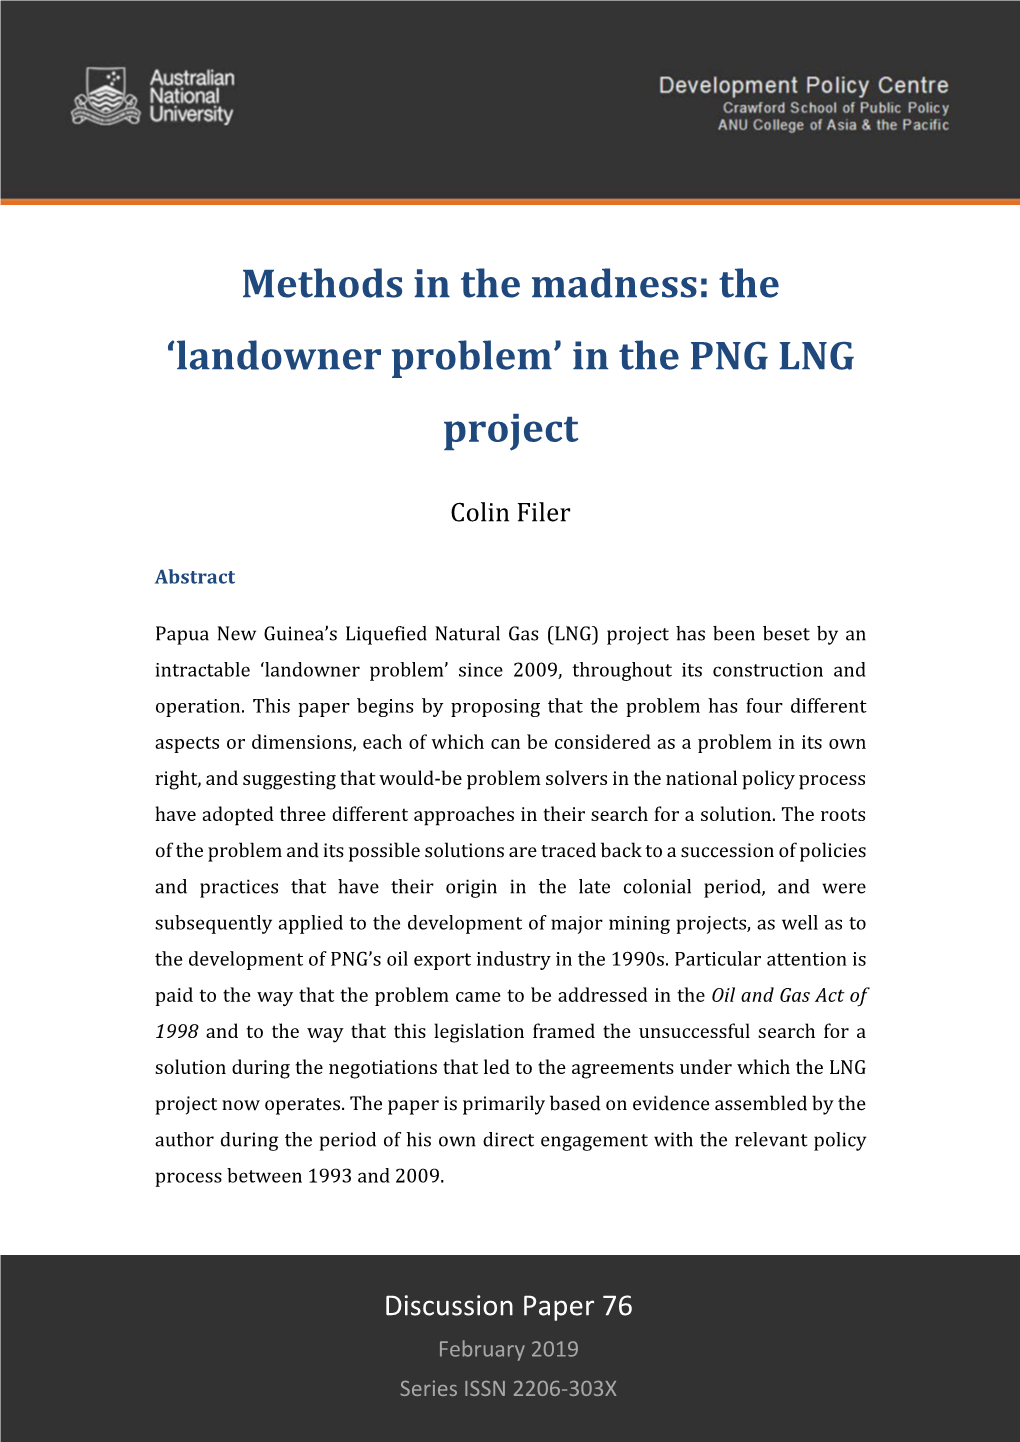 Methods in the Madness: the 'Landowner Problem' in the PNG